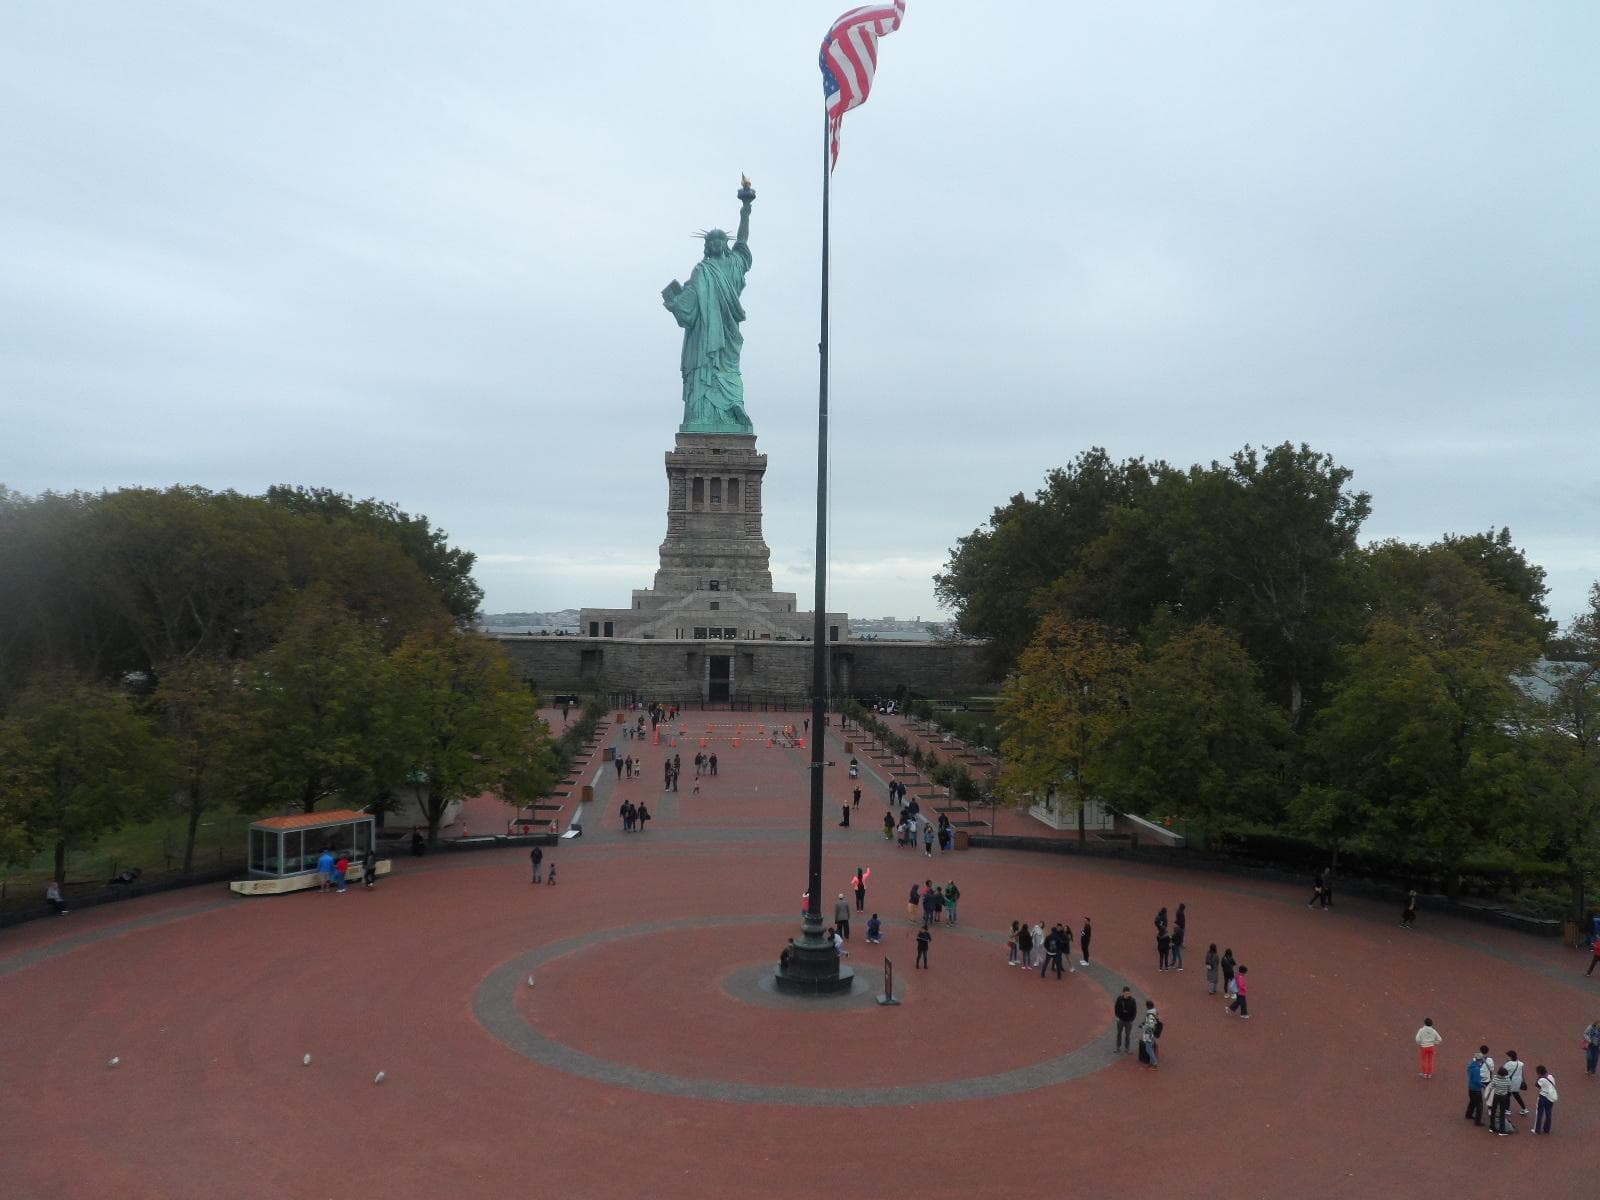 The view of the statue from the Statue of Liberty Museum; photo credit: Katherine Michel